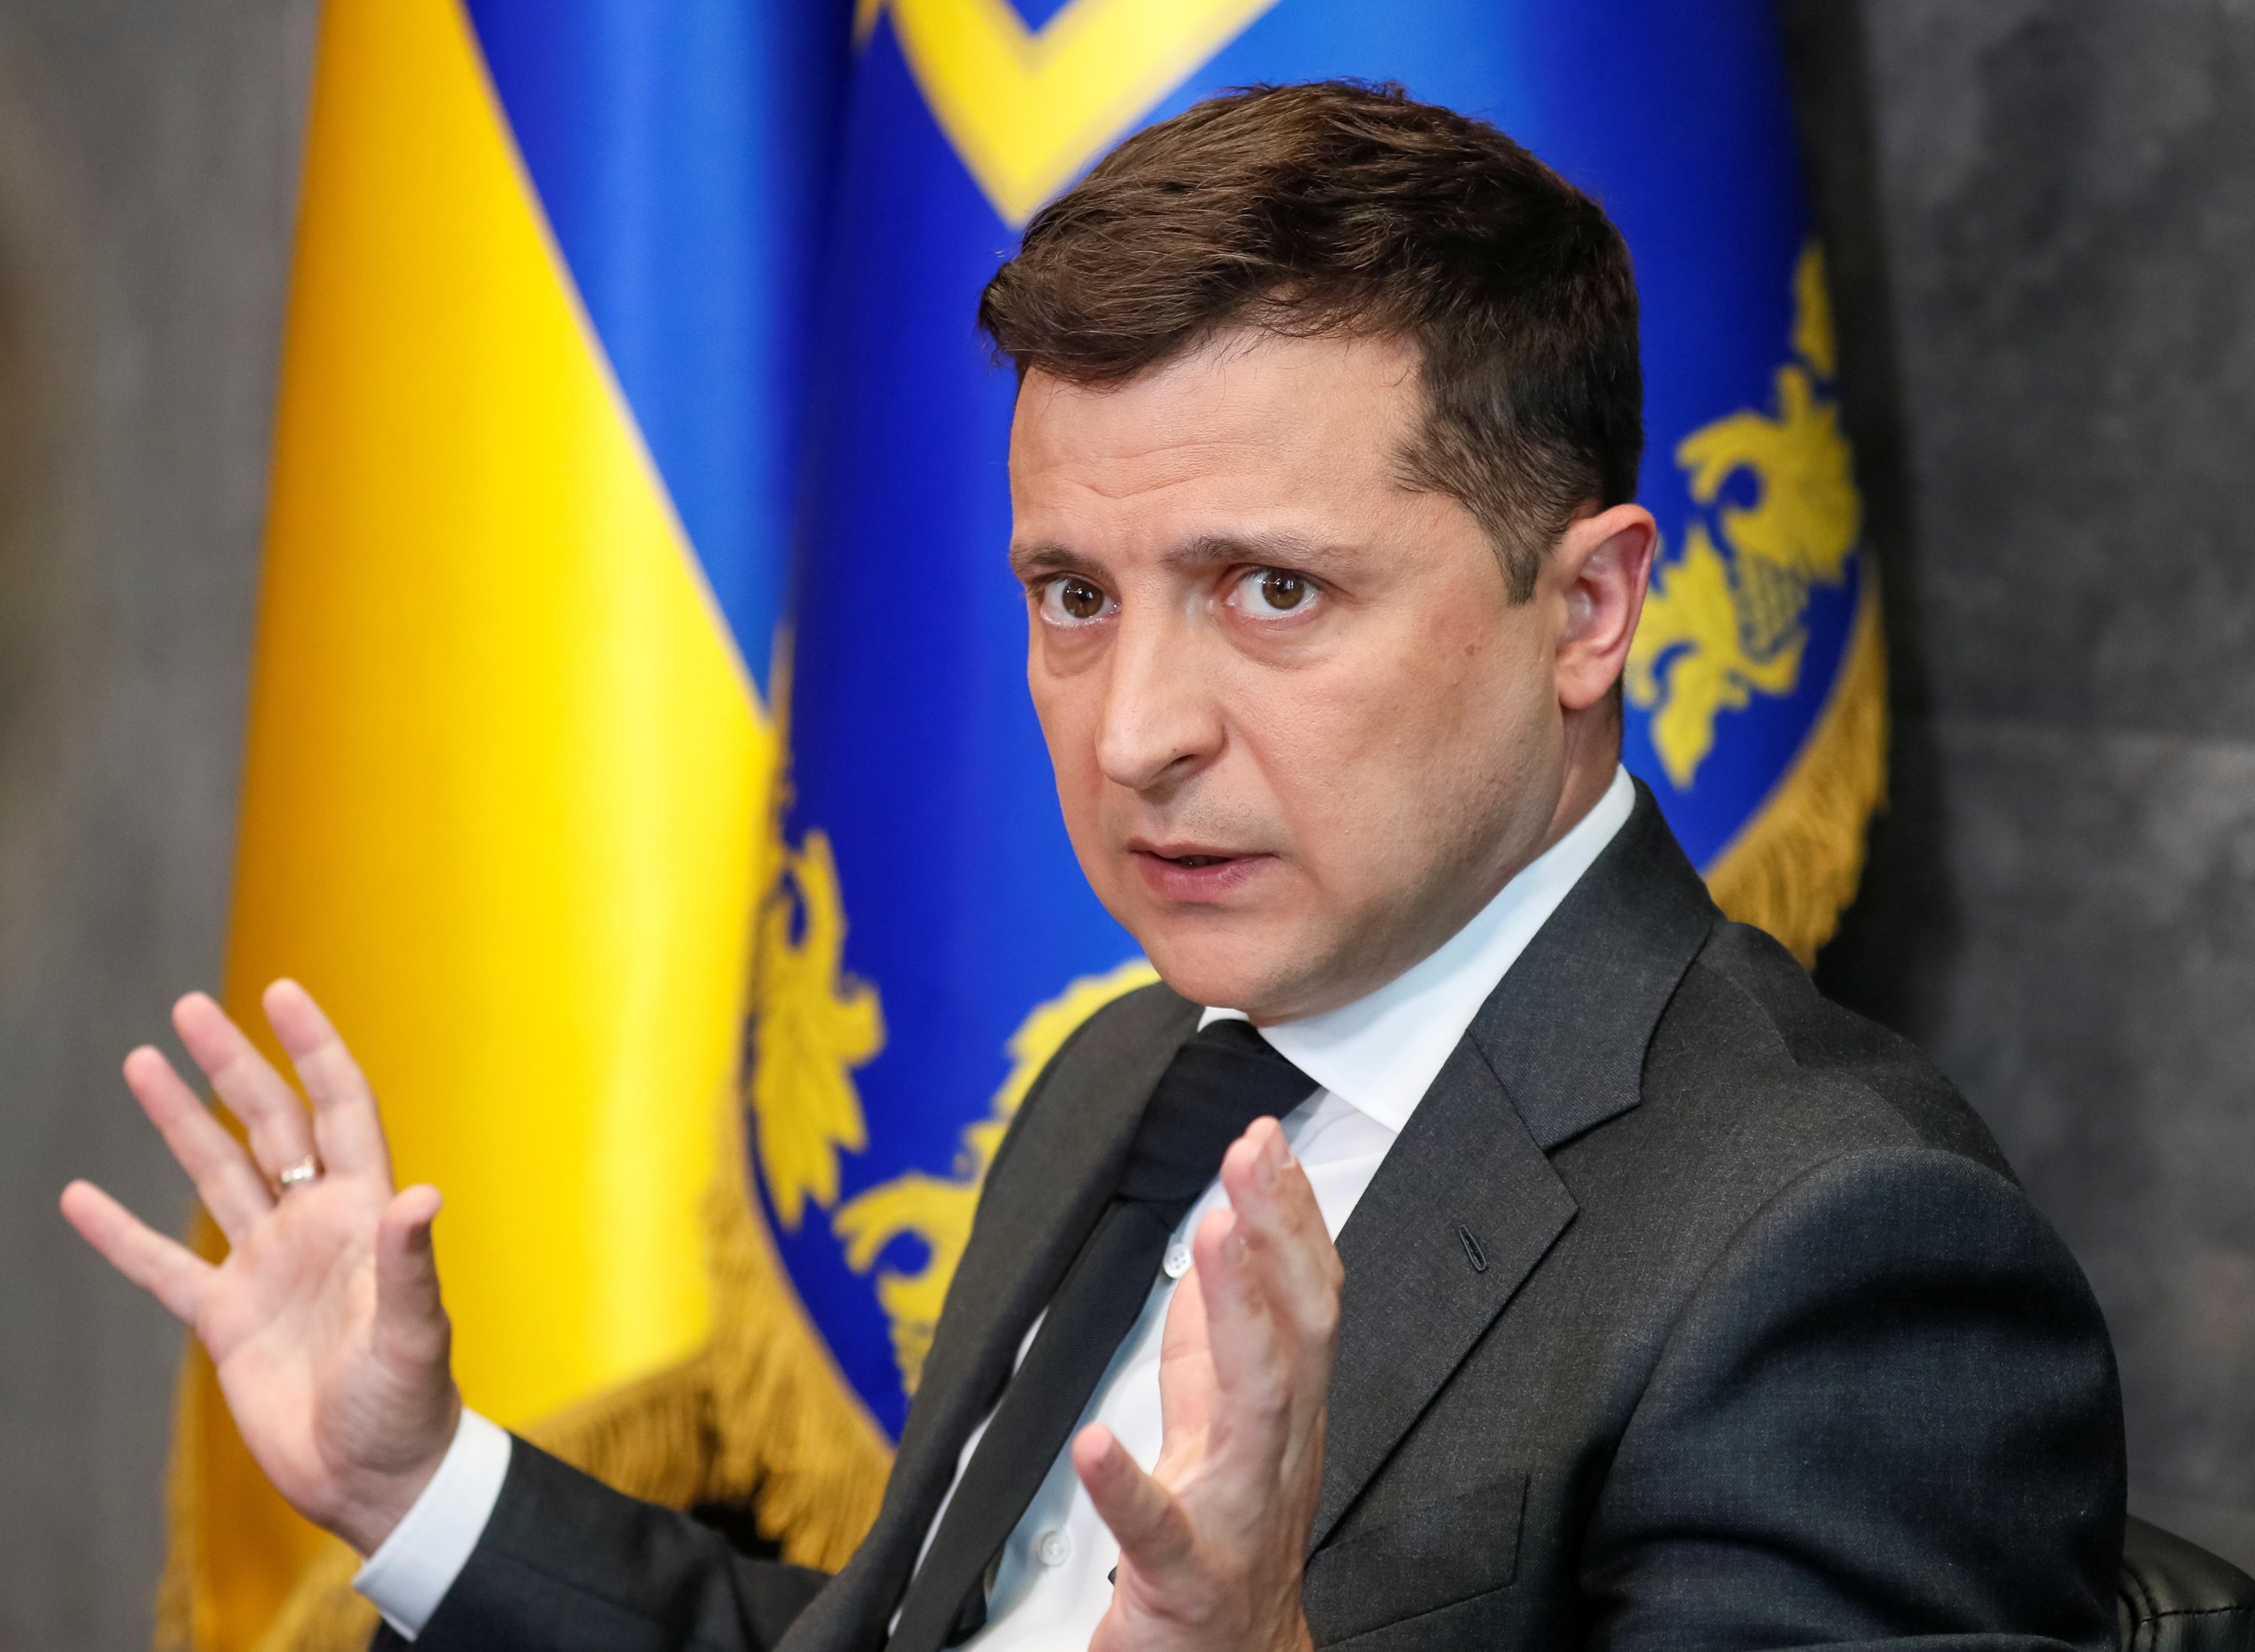 The human toll has been overwhelming, and the scenes of brave Ukrainians have been matched by the brave leadership and marvelous public diplomacy carried out by President Zelensky and other leaders.